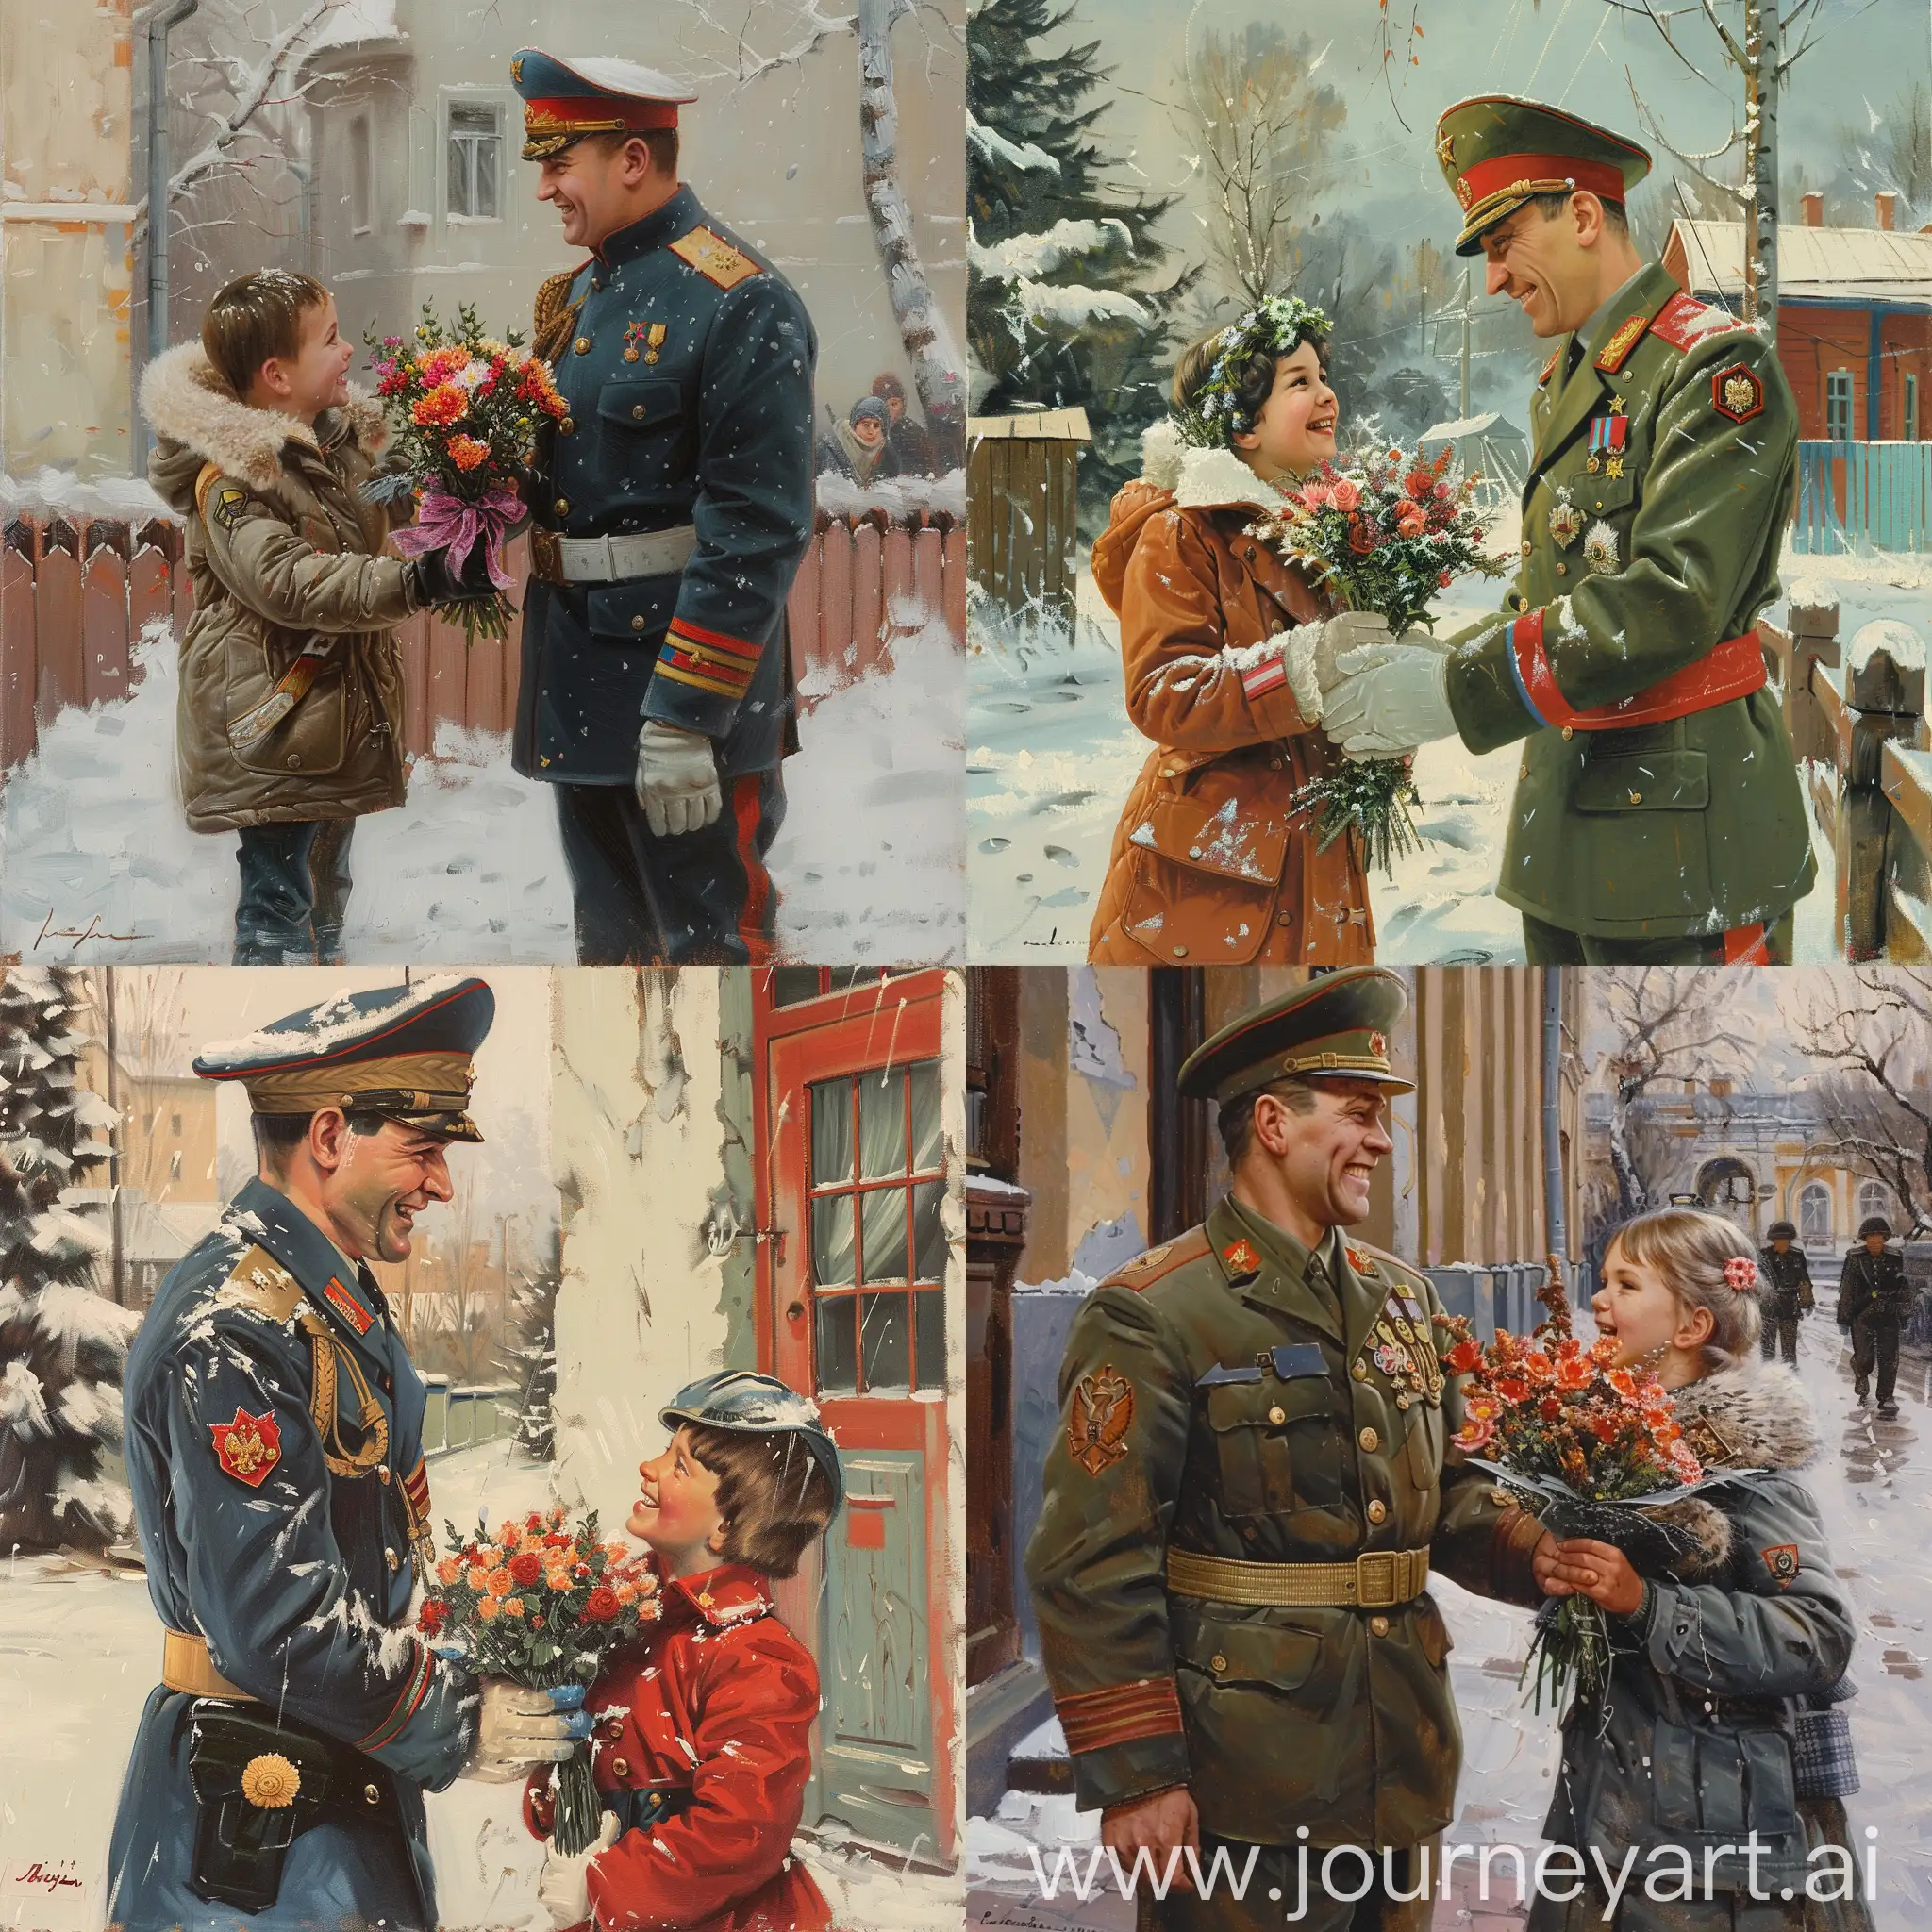 Russian holiday February 23, postcard - child gives flowers to military officer, they smile, oil painting, airbrush, гипердетализация